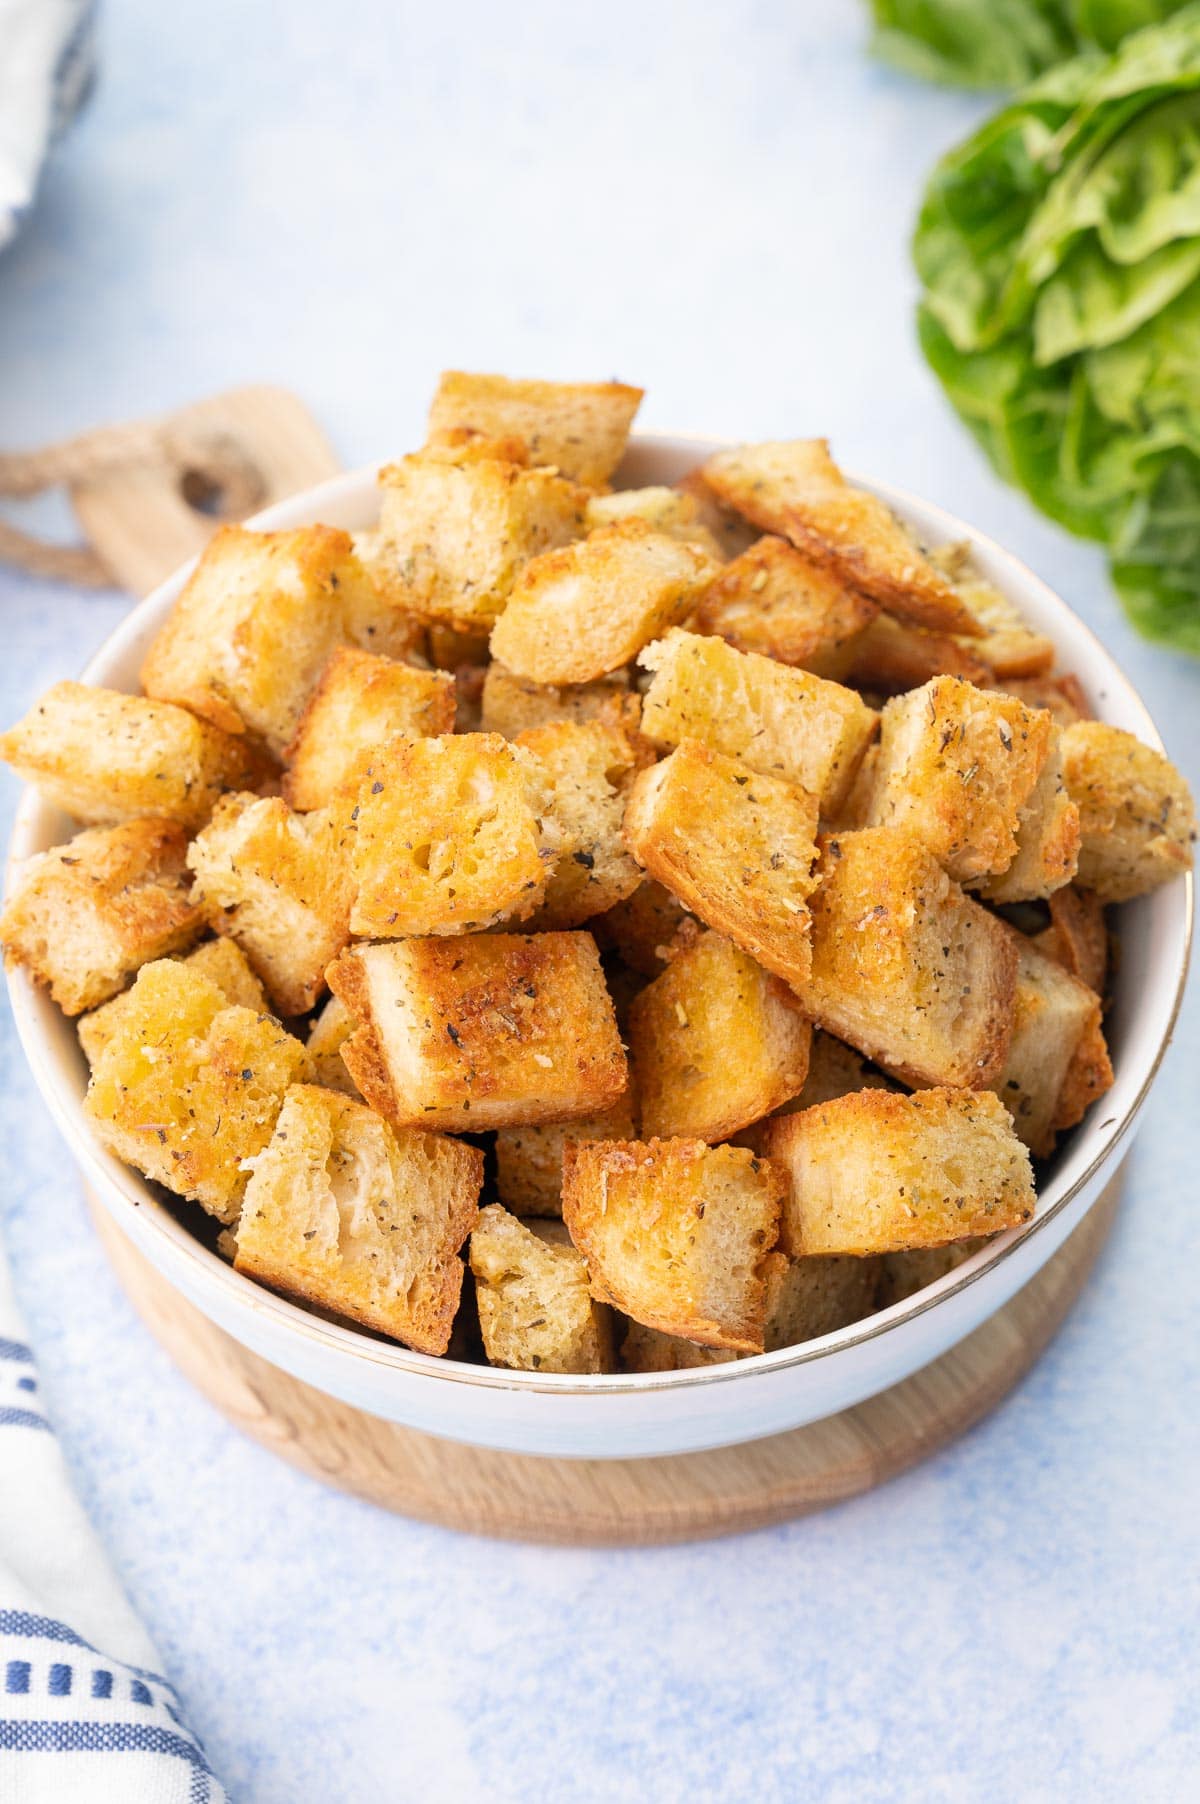 Homemade croutons in a white bowl on a blue background.